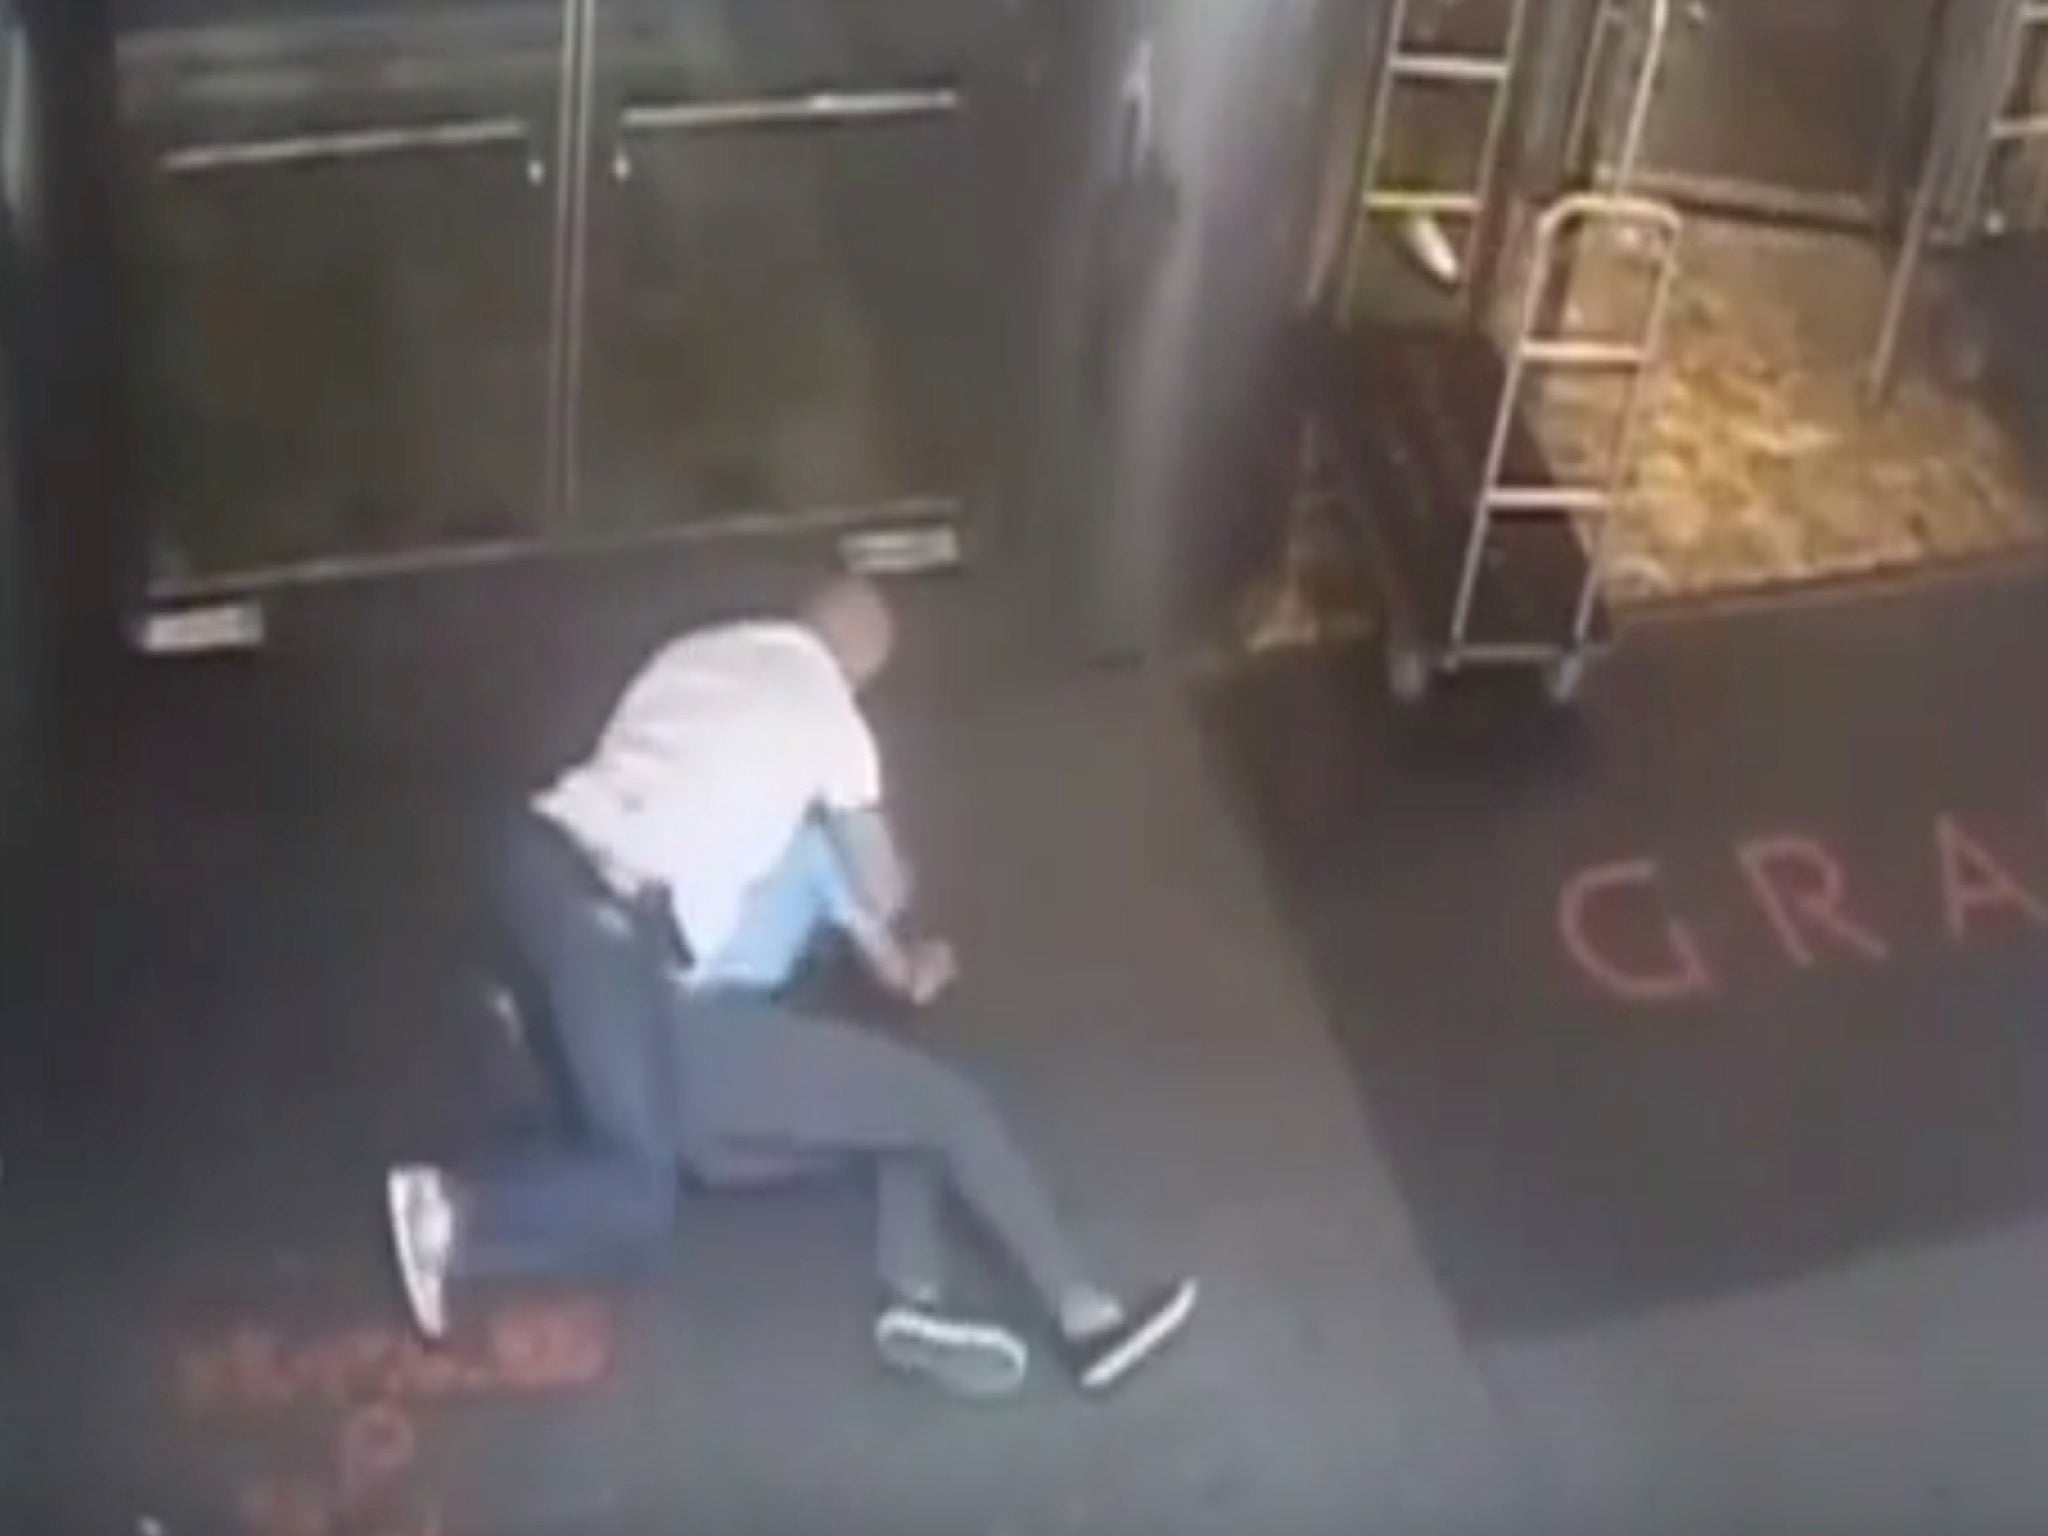 The video of James Blake's arrest was released by officers in New York